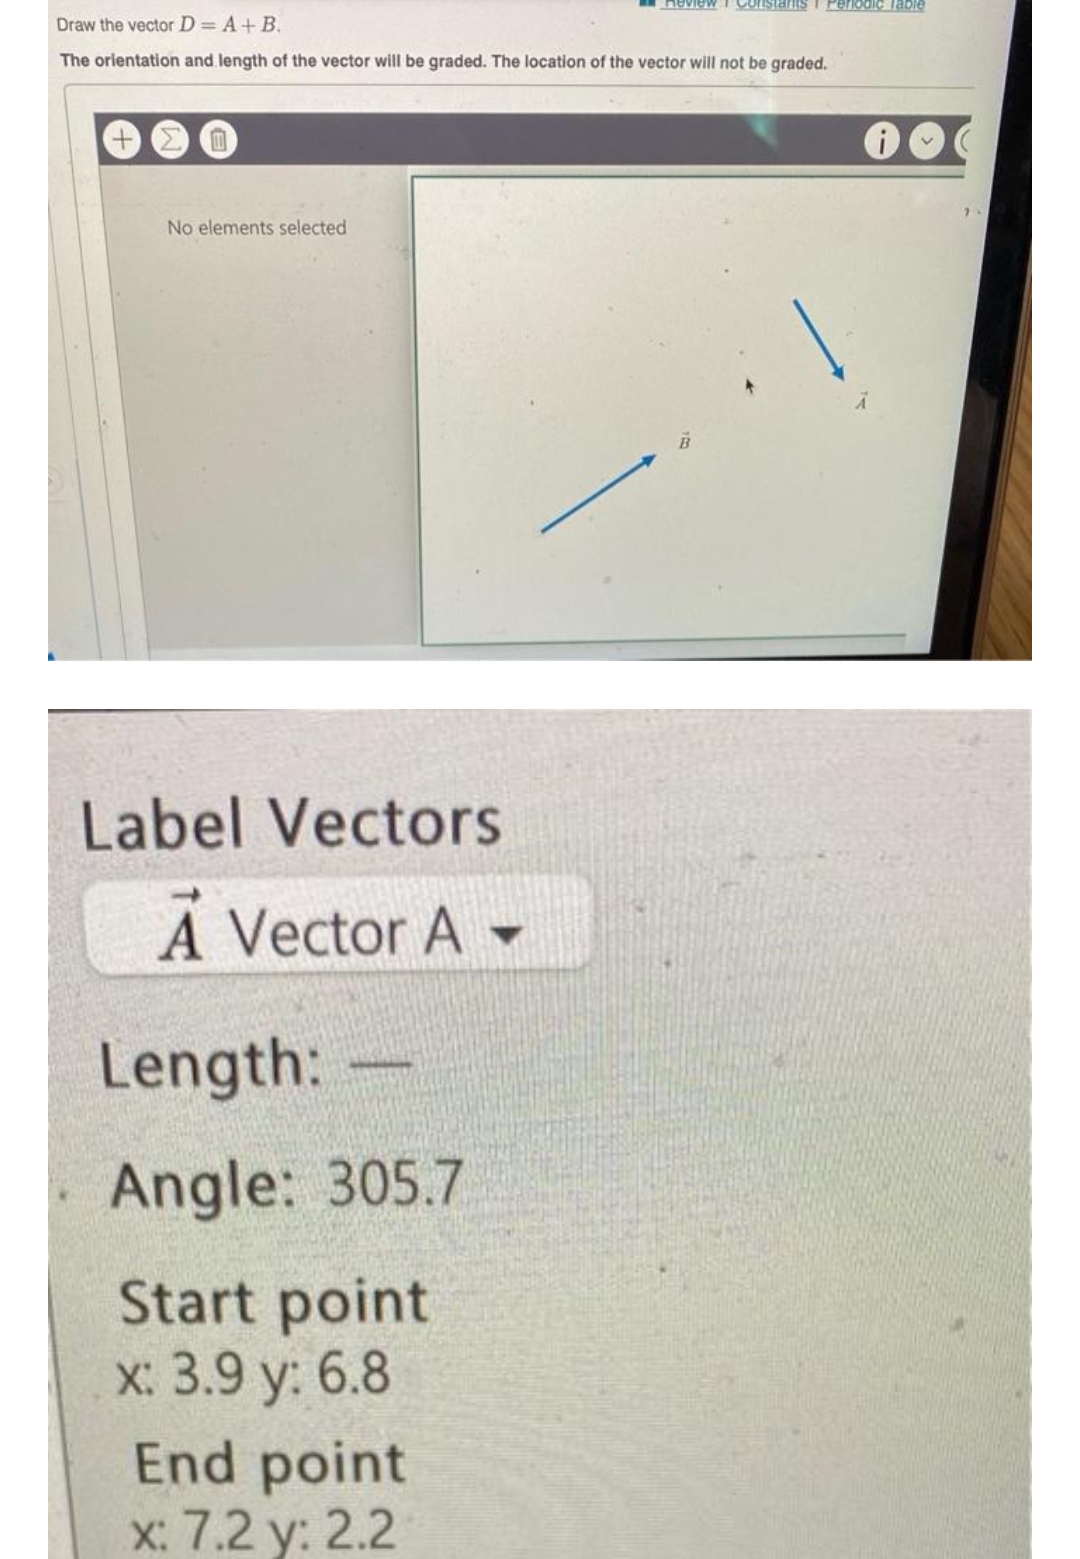 Draw the vector D = A + B.
The orientation and length of the vector will be graded. The location of the vector will not be graded.
0
No elements selected
Label Vectors
A Vector A-
Length:
Angle: 305.7
Start point
x: 3.9 y: 6.8
Review Constants Periodic Table
End point
x: 7.2 y: 2.2
i